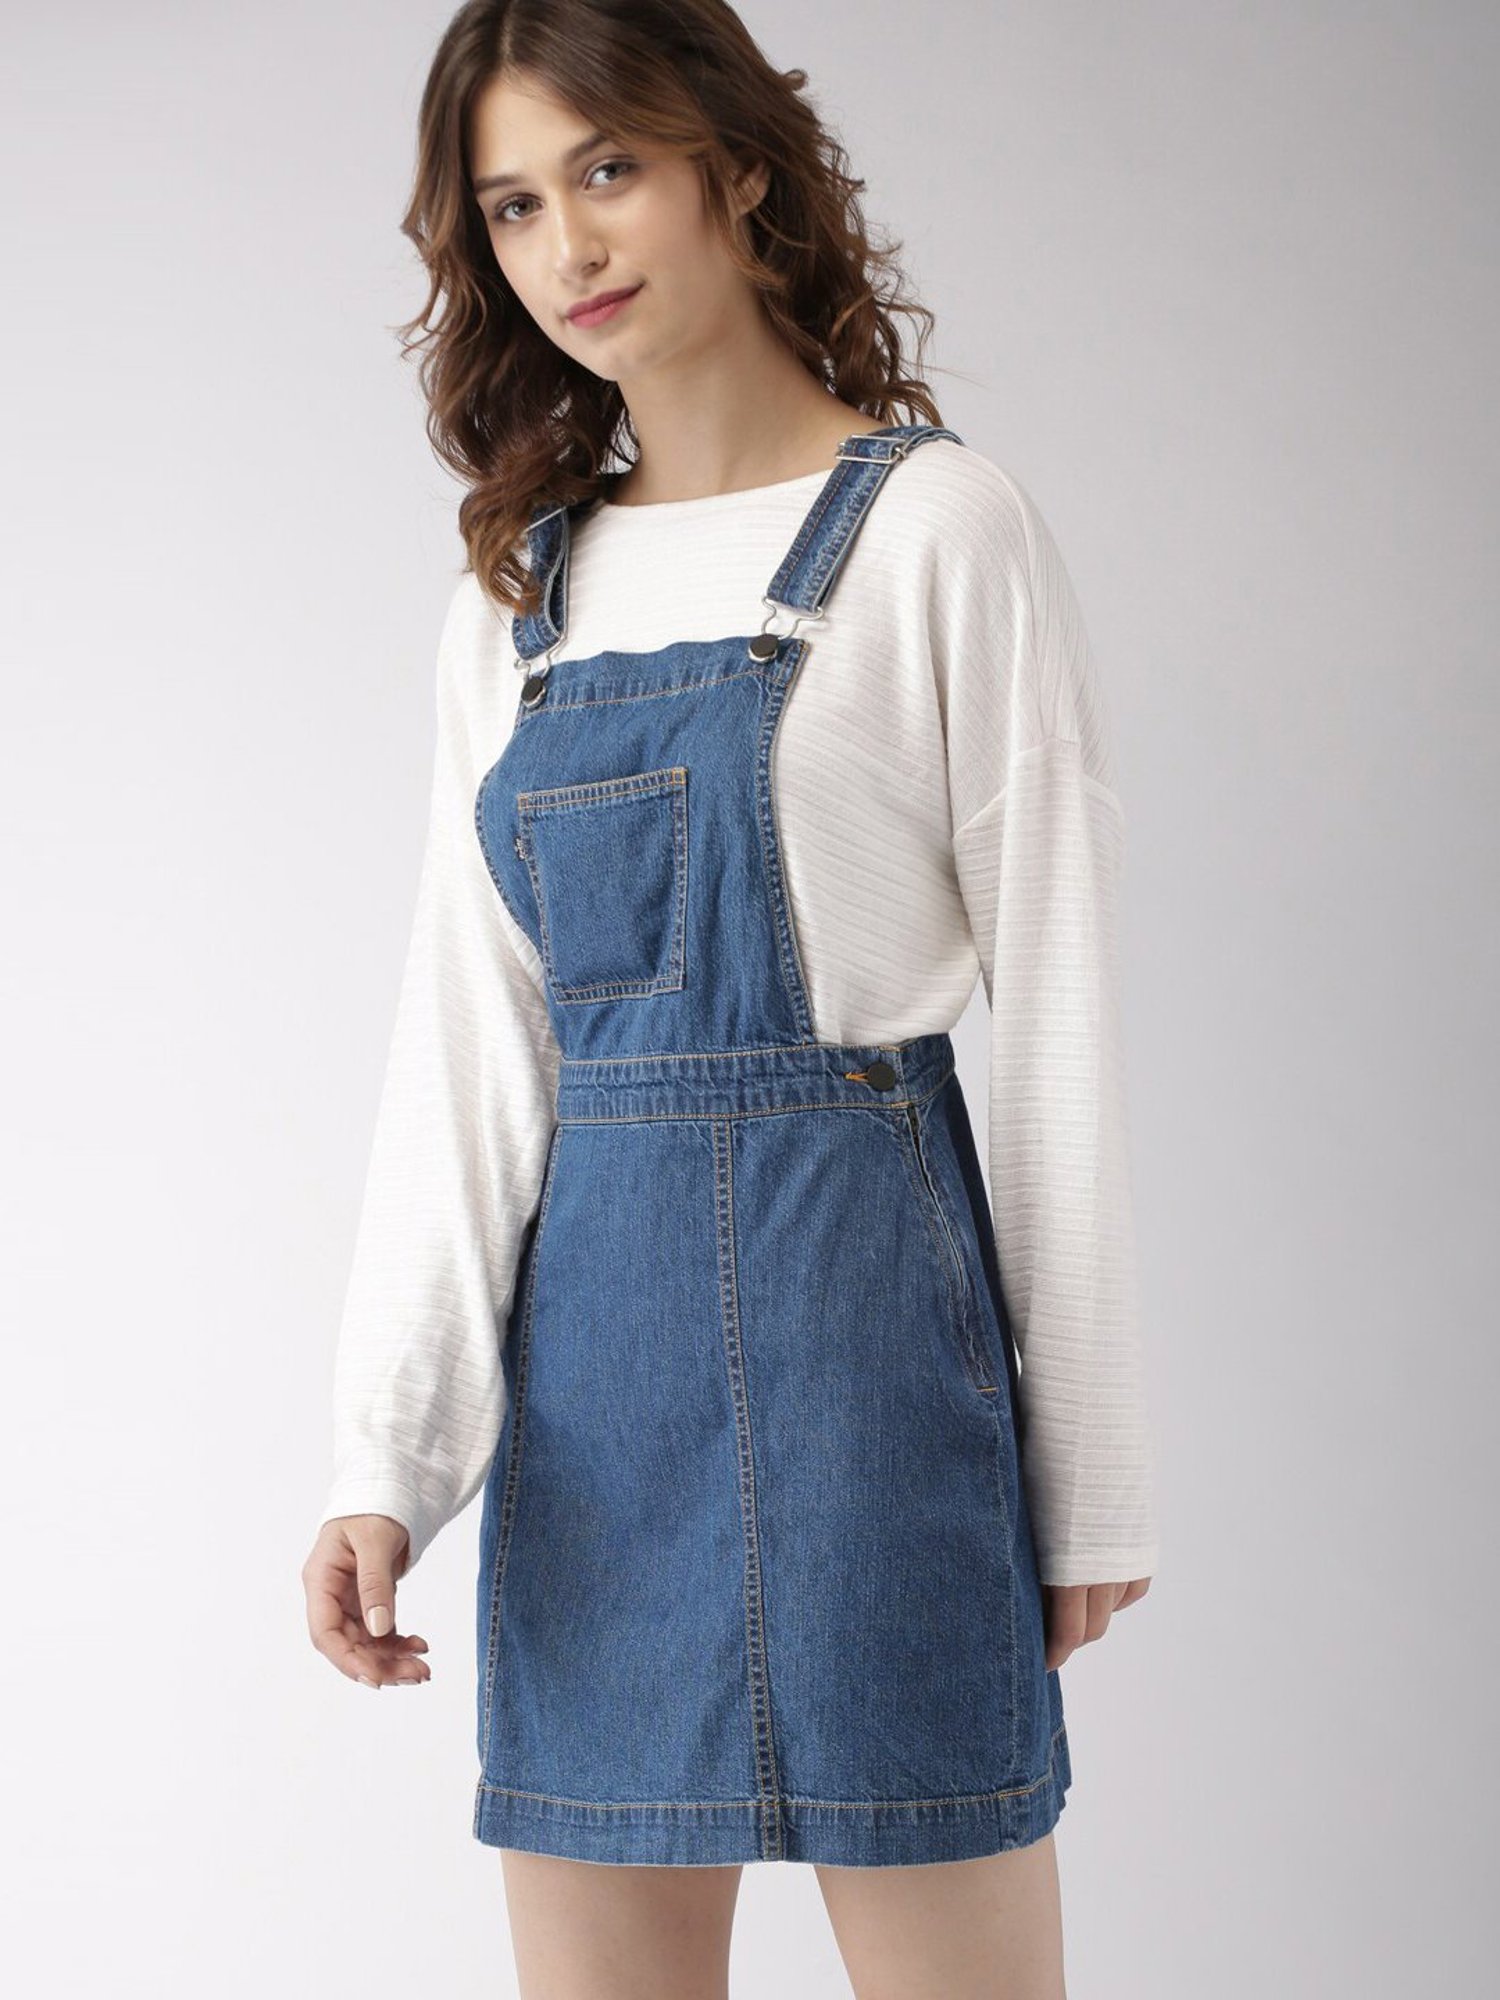 Buy OXYDENIM Denim Dungaree Skirt for Women/Girls (Without Inner) at  Amazon.in